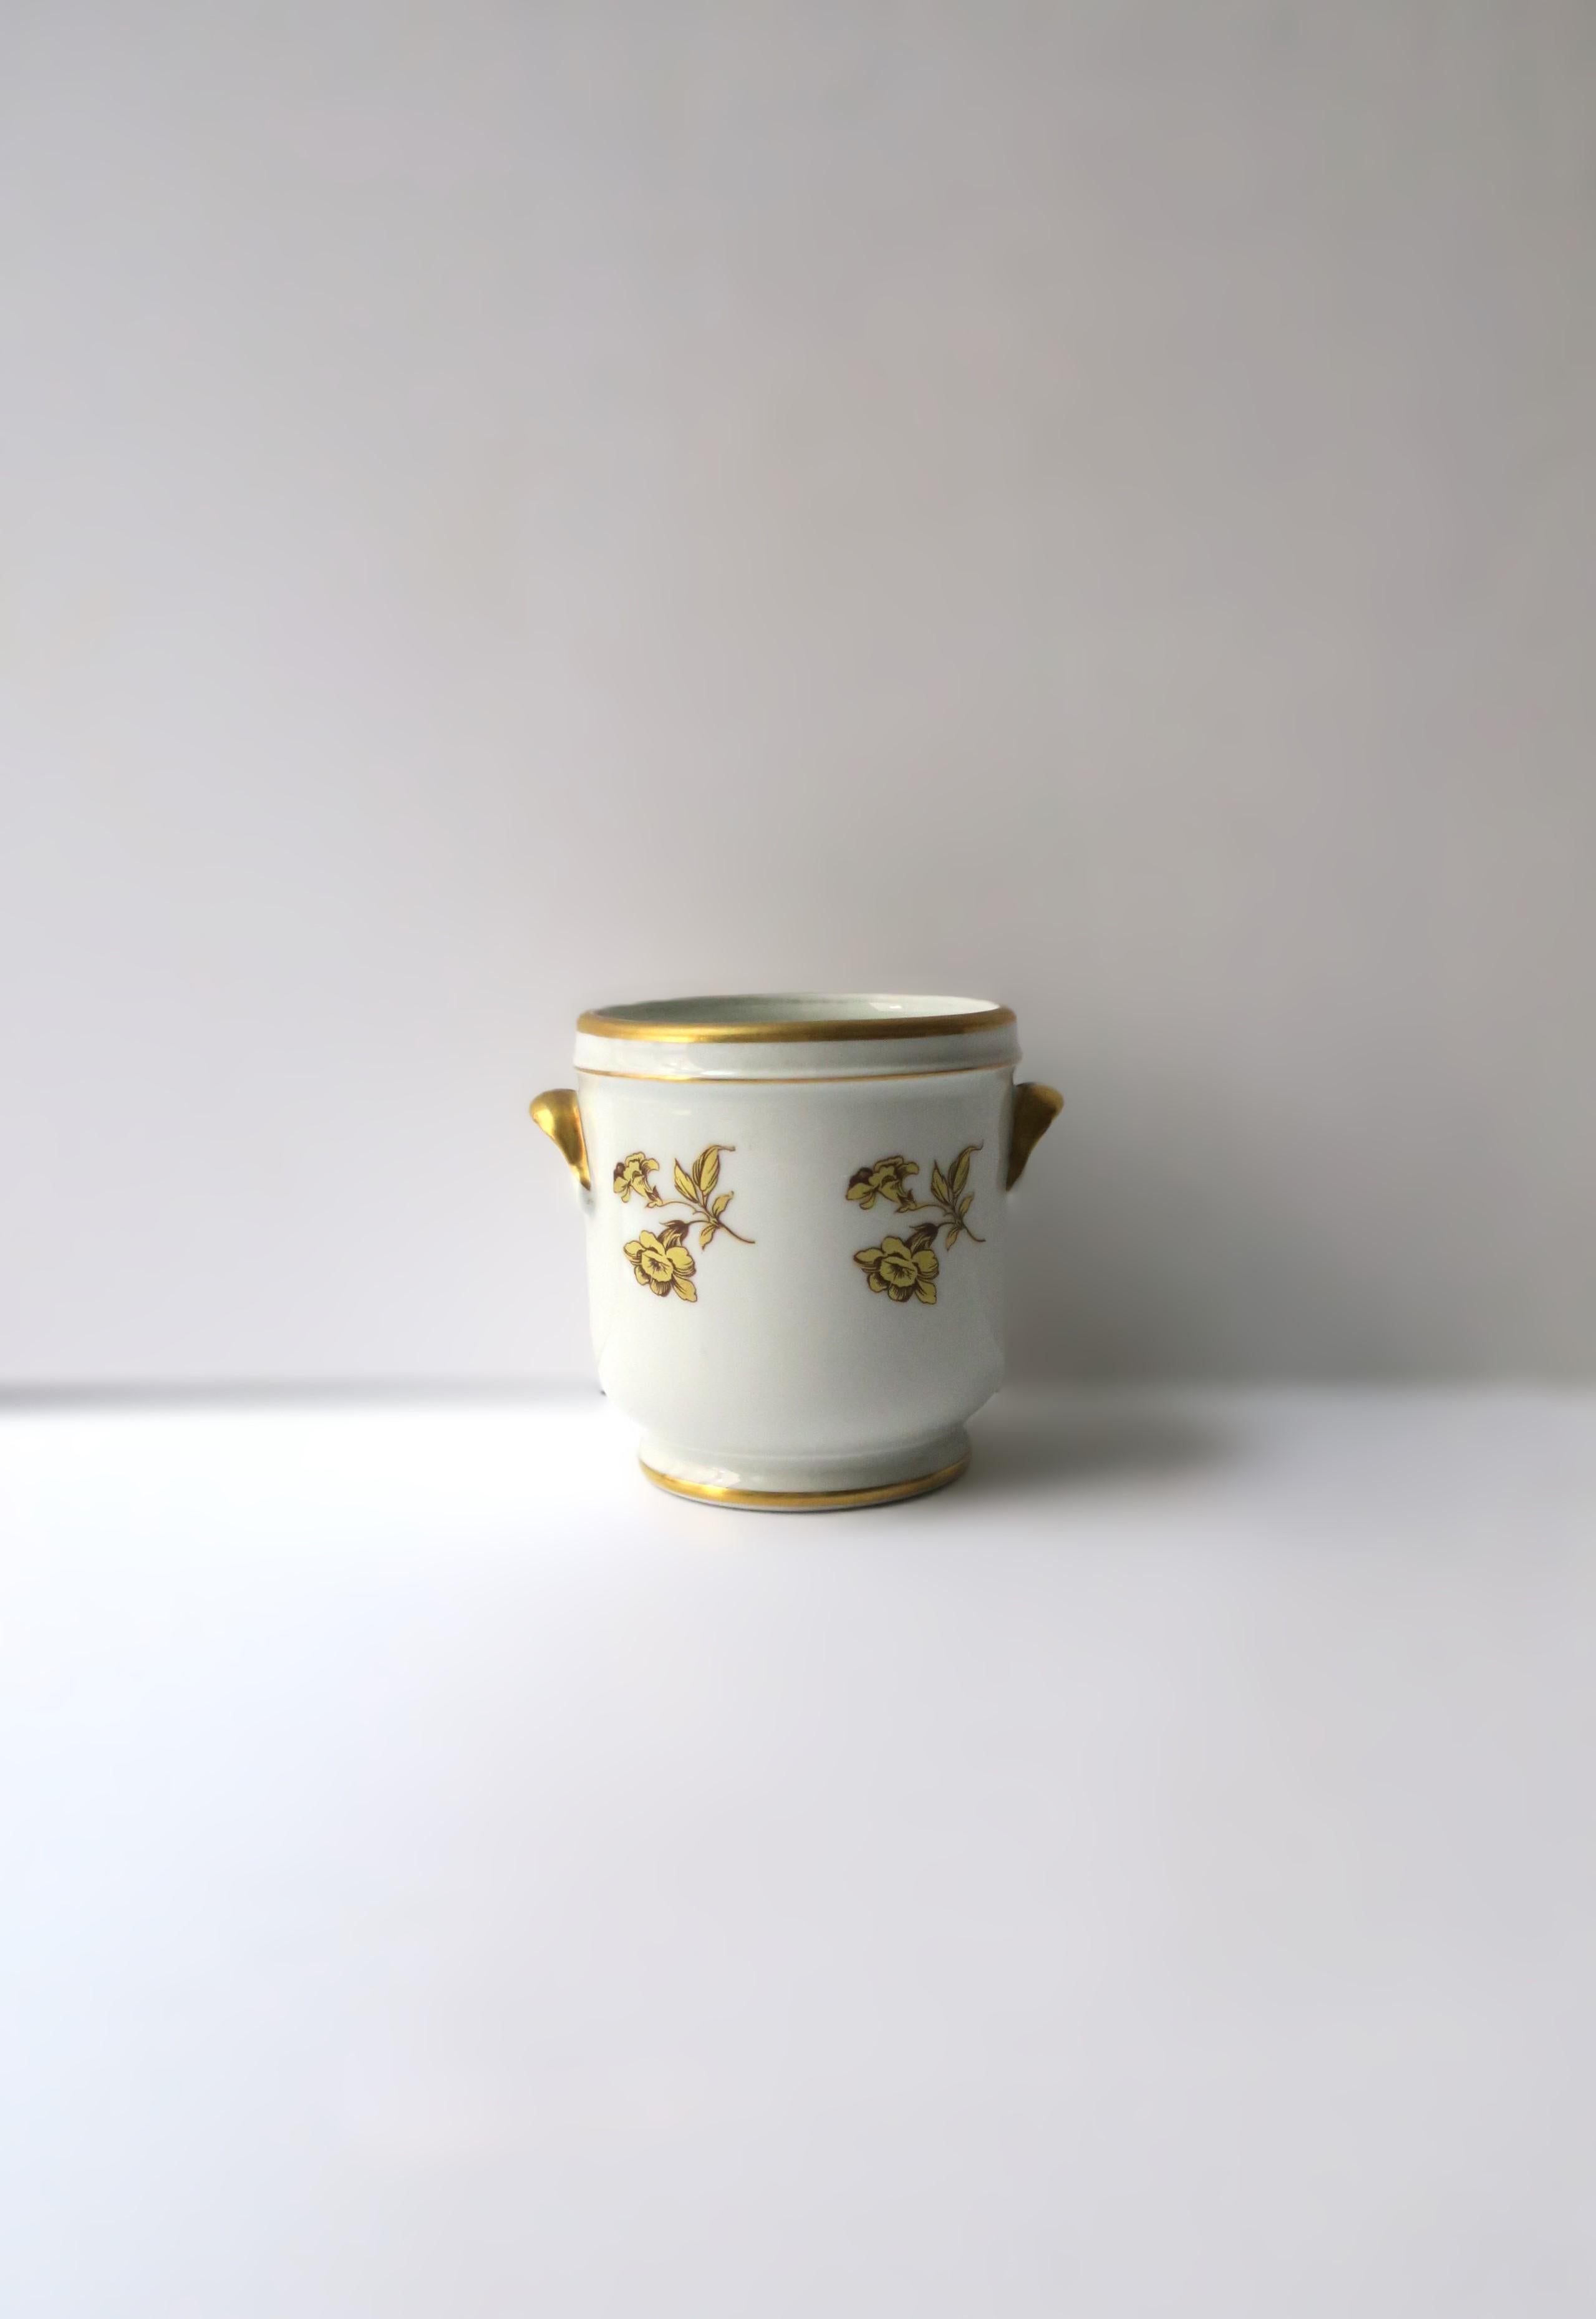 A beautiful French white porcelain plant or flower planter cachepot jardinière, with gold detail, circa mid to late-20th century, France. Piece is from 200-year-old master porcelain maker, Pillivuyt, France. Cachepot has two handles with gold